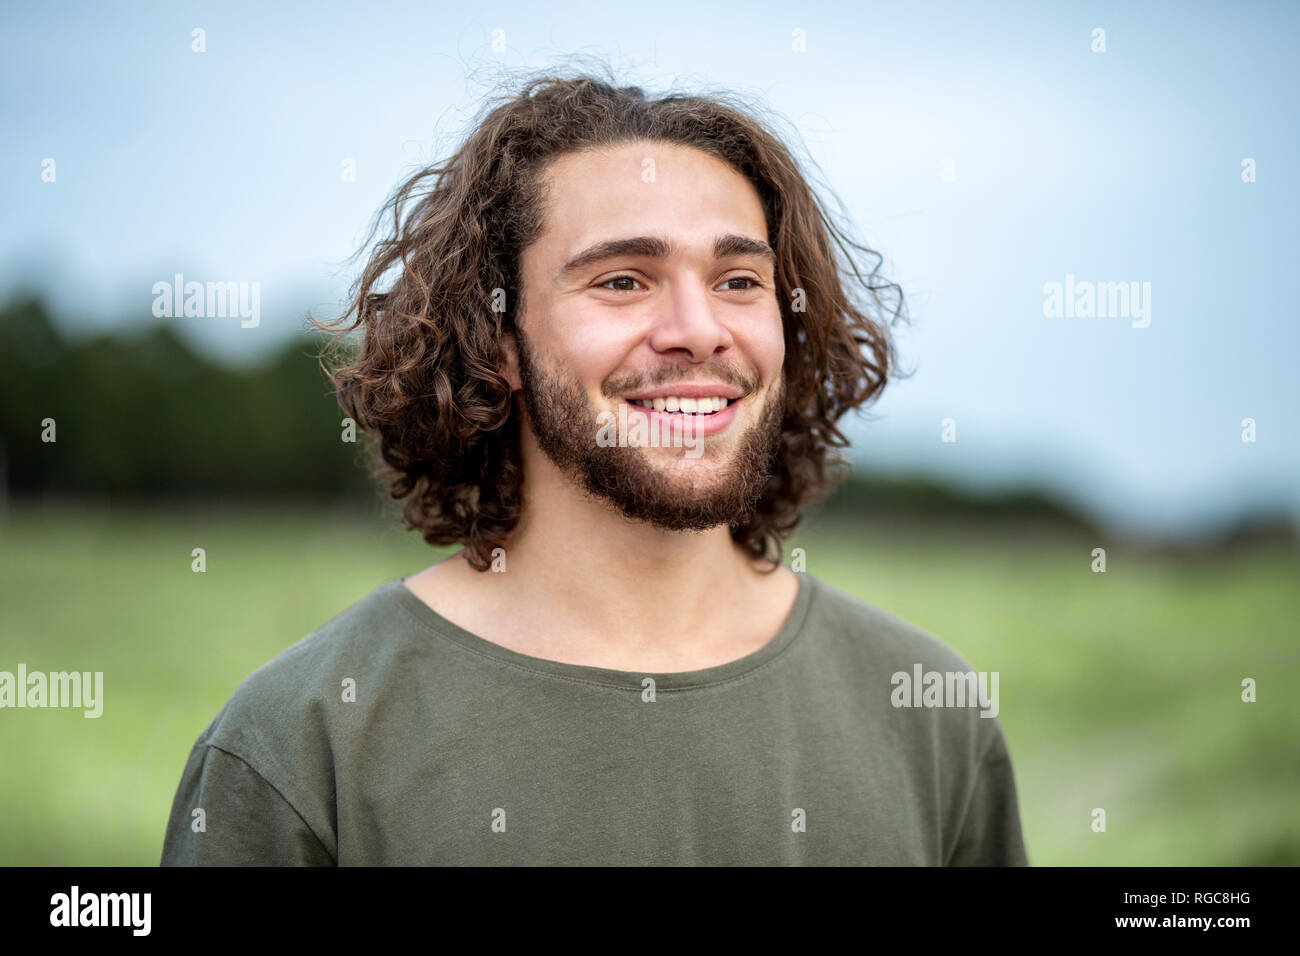 Portrait of happy young man outdoors Stock Photo